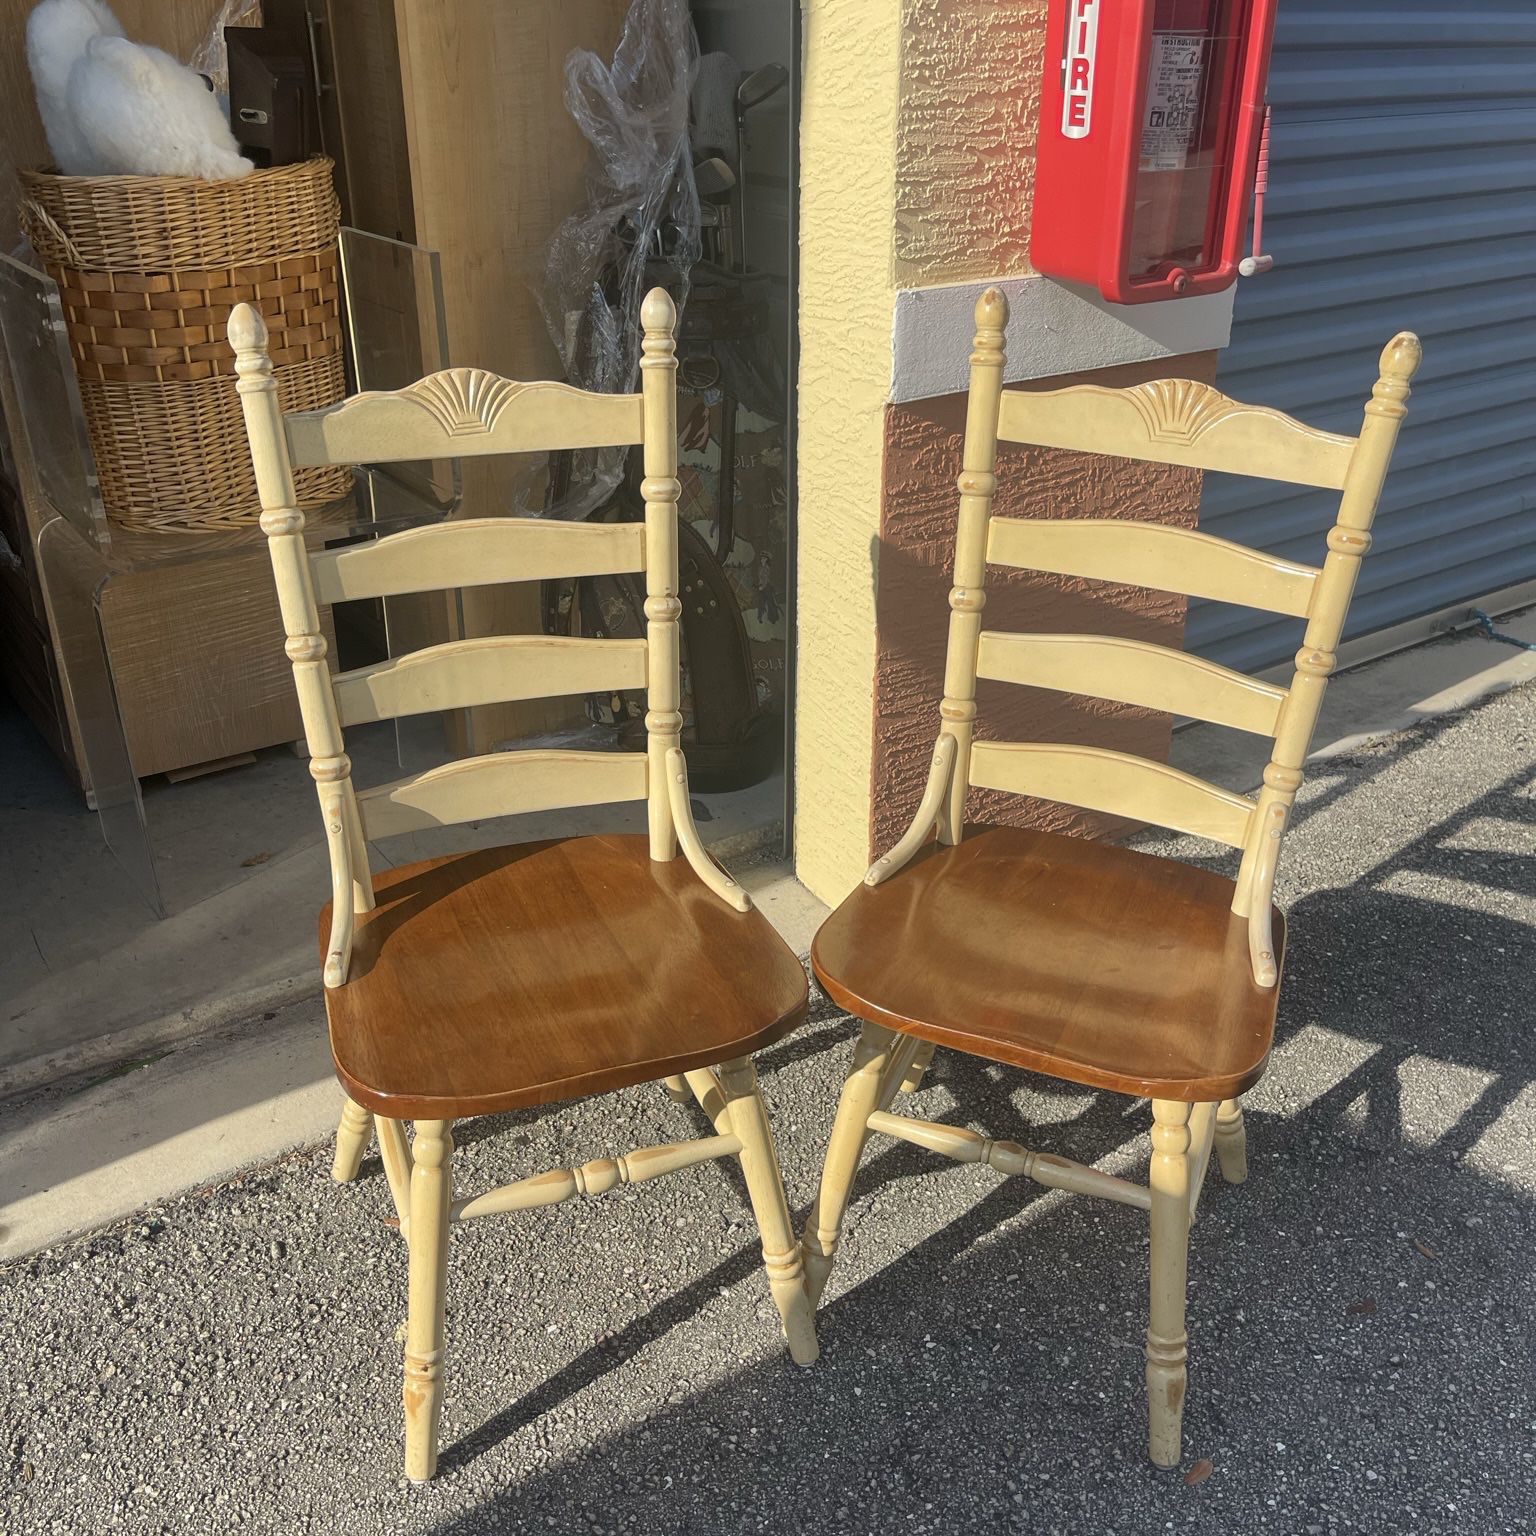 2 Dining chairs - Only $15